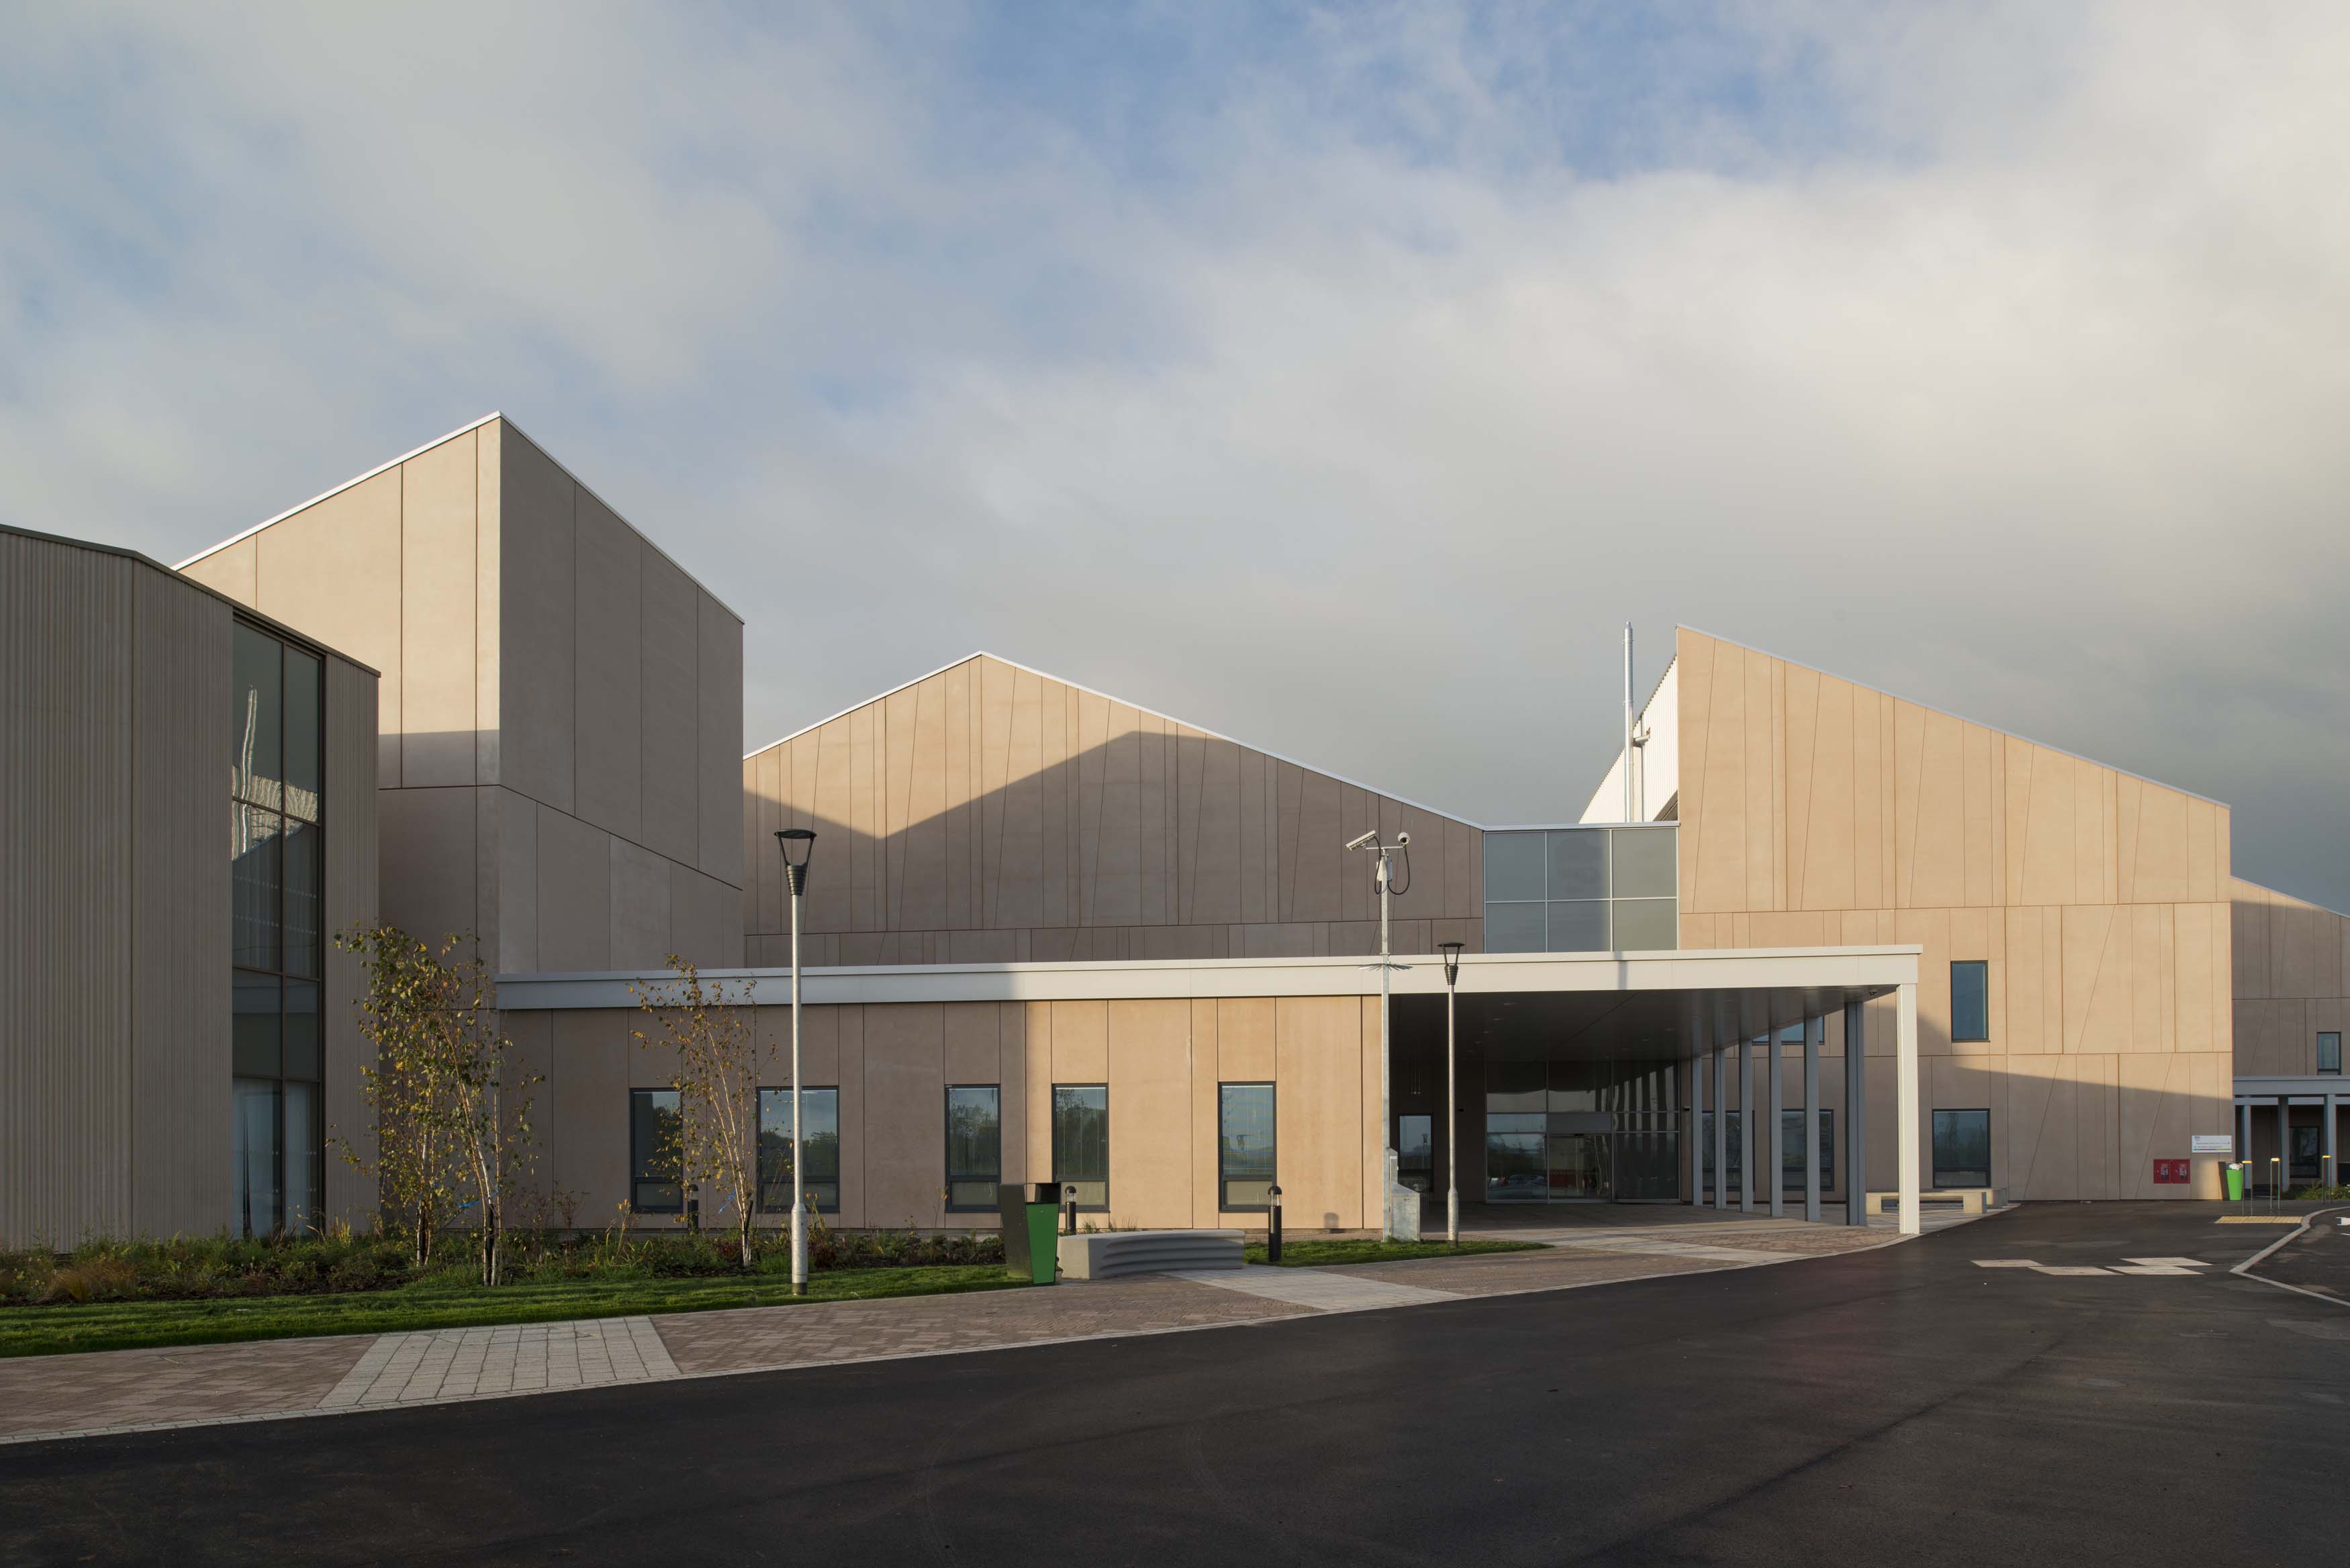 New Dumfries and Galloway Royal Infirmary opens

